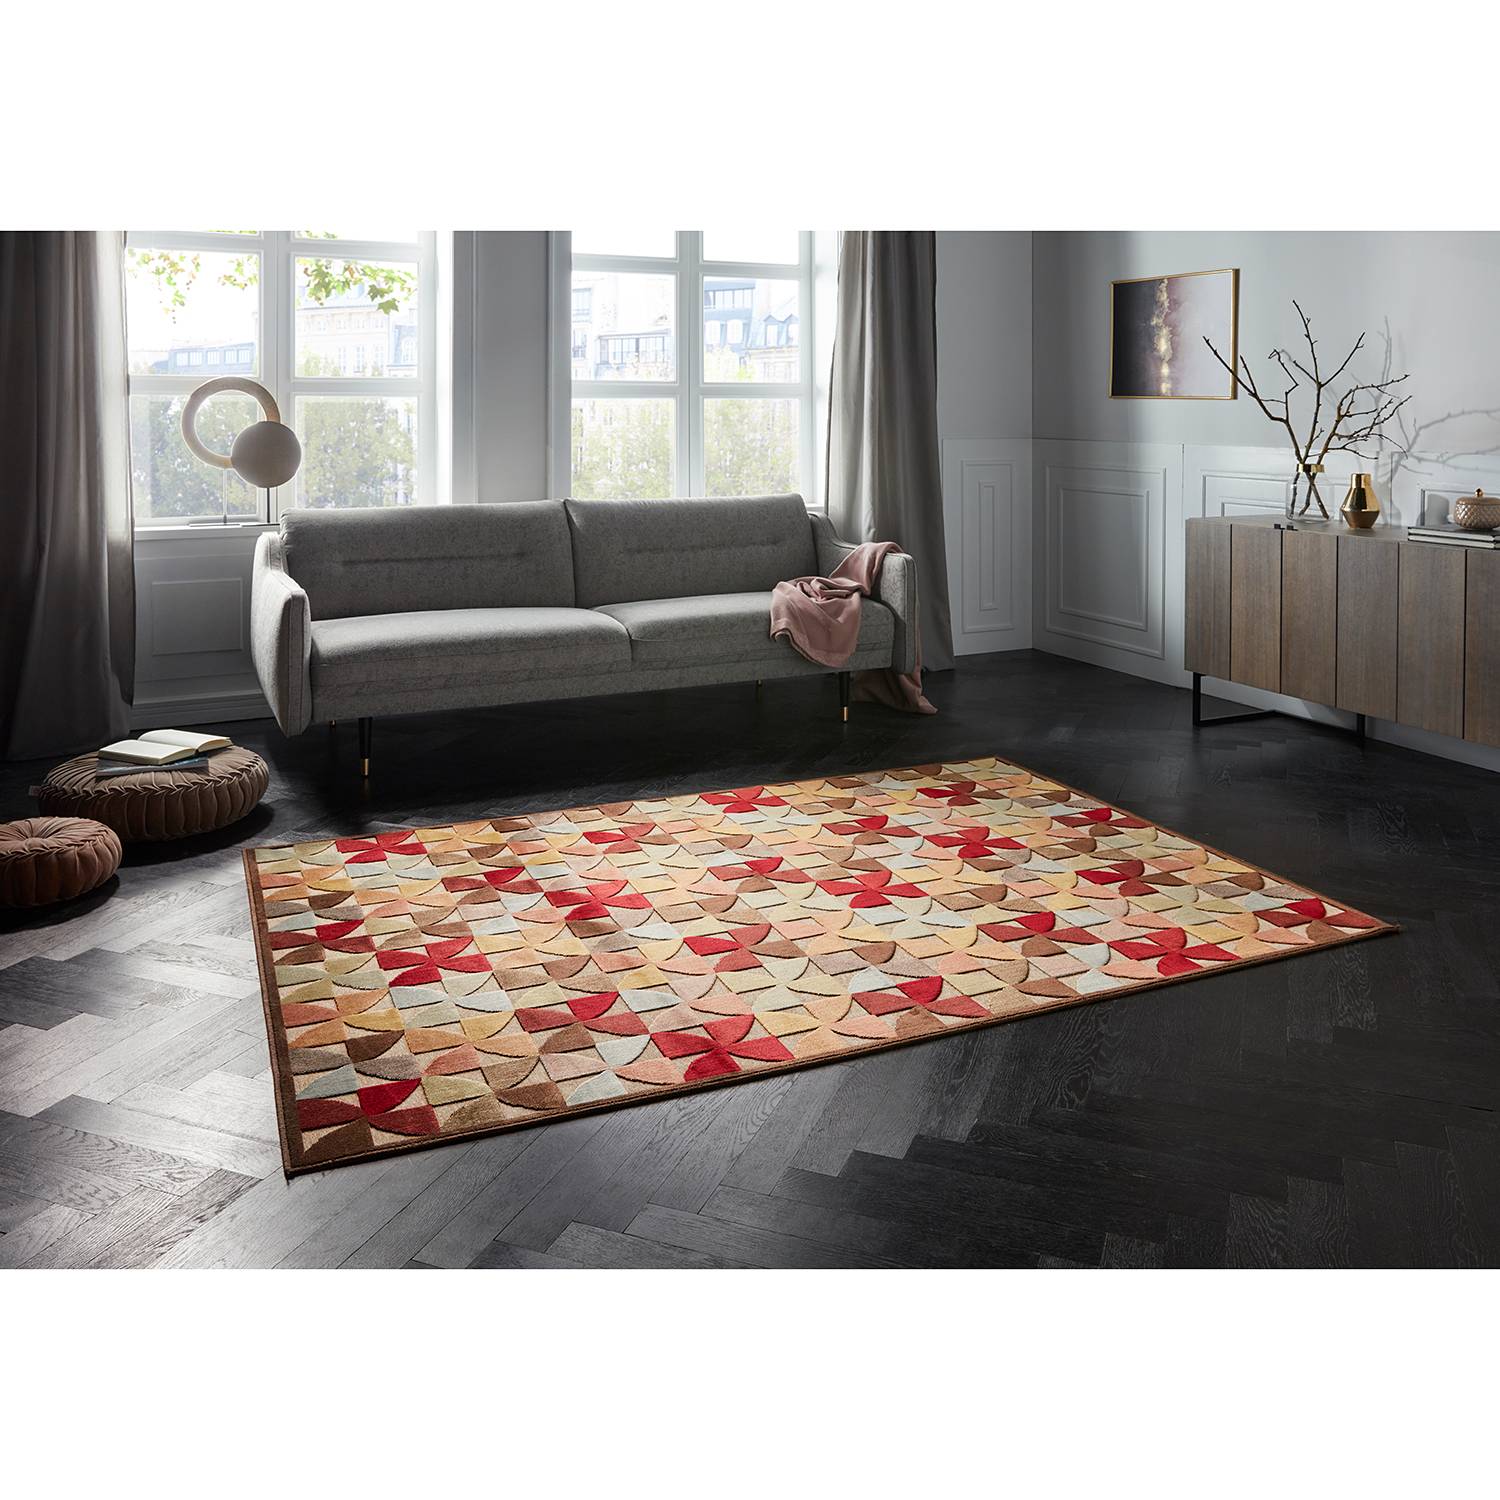 Image of Tapis Ailette 000000001000193684